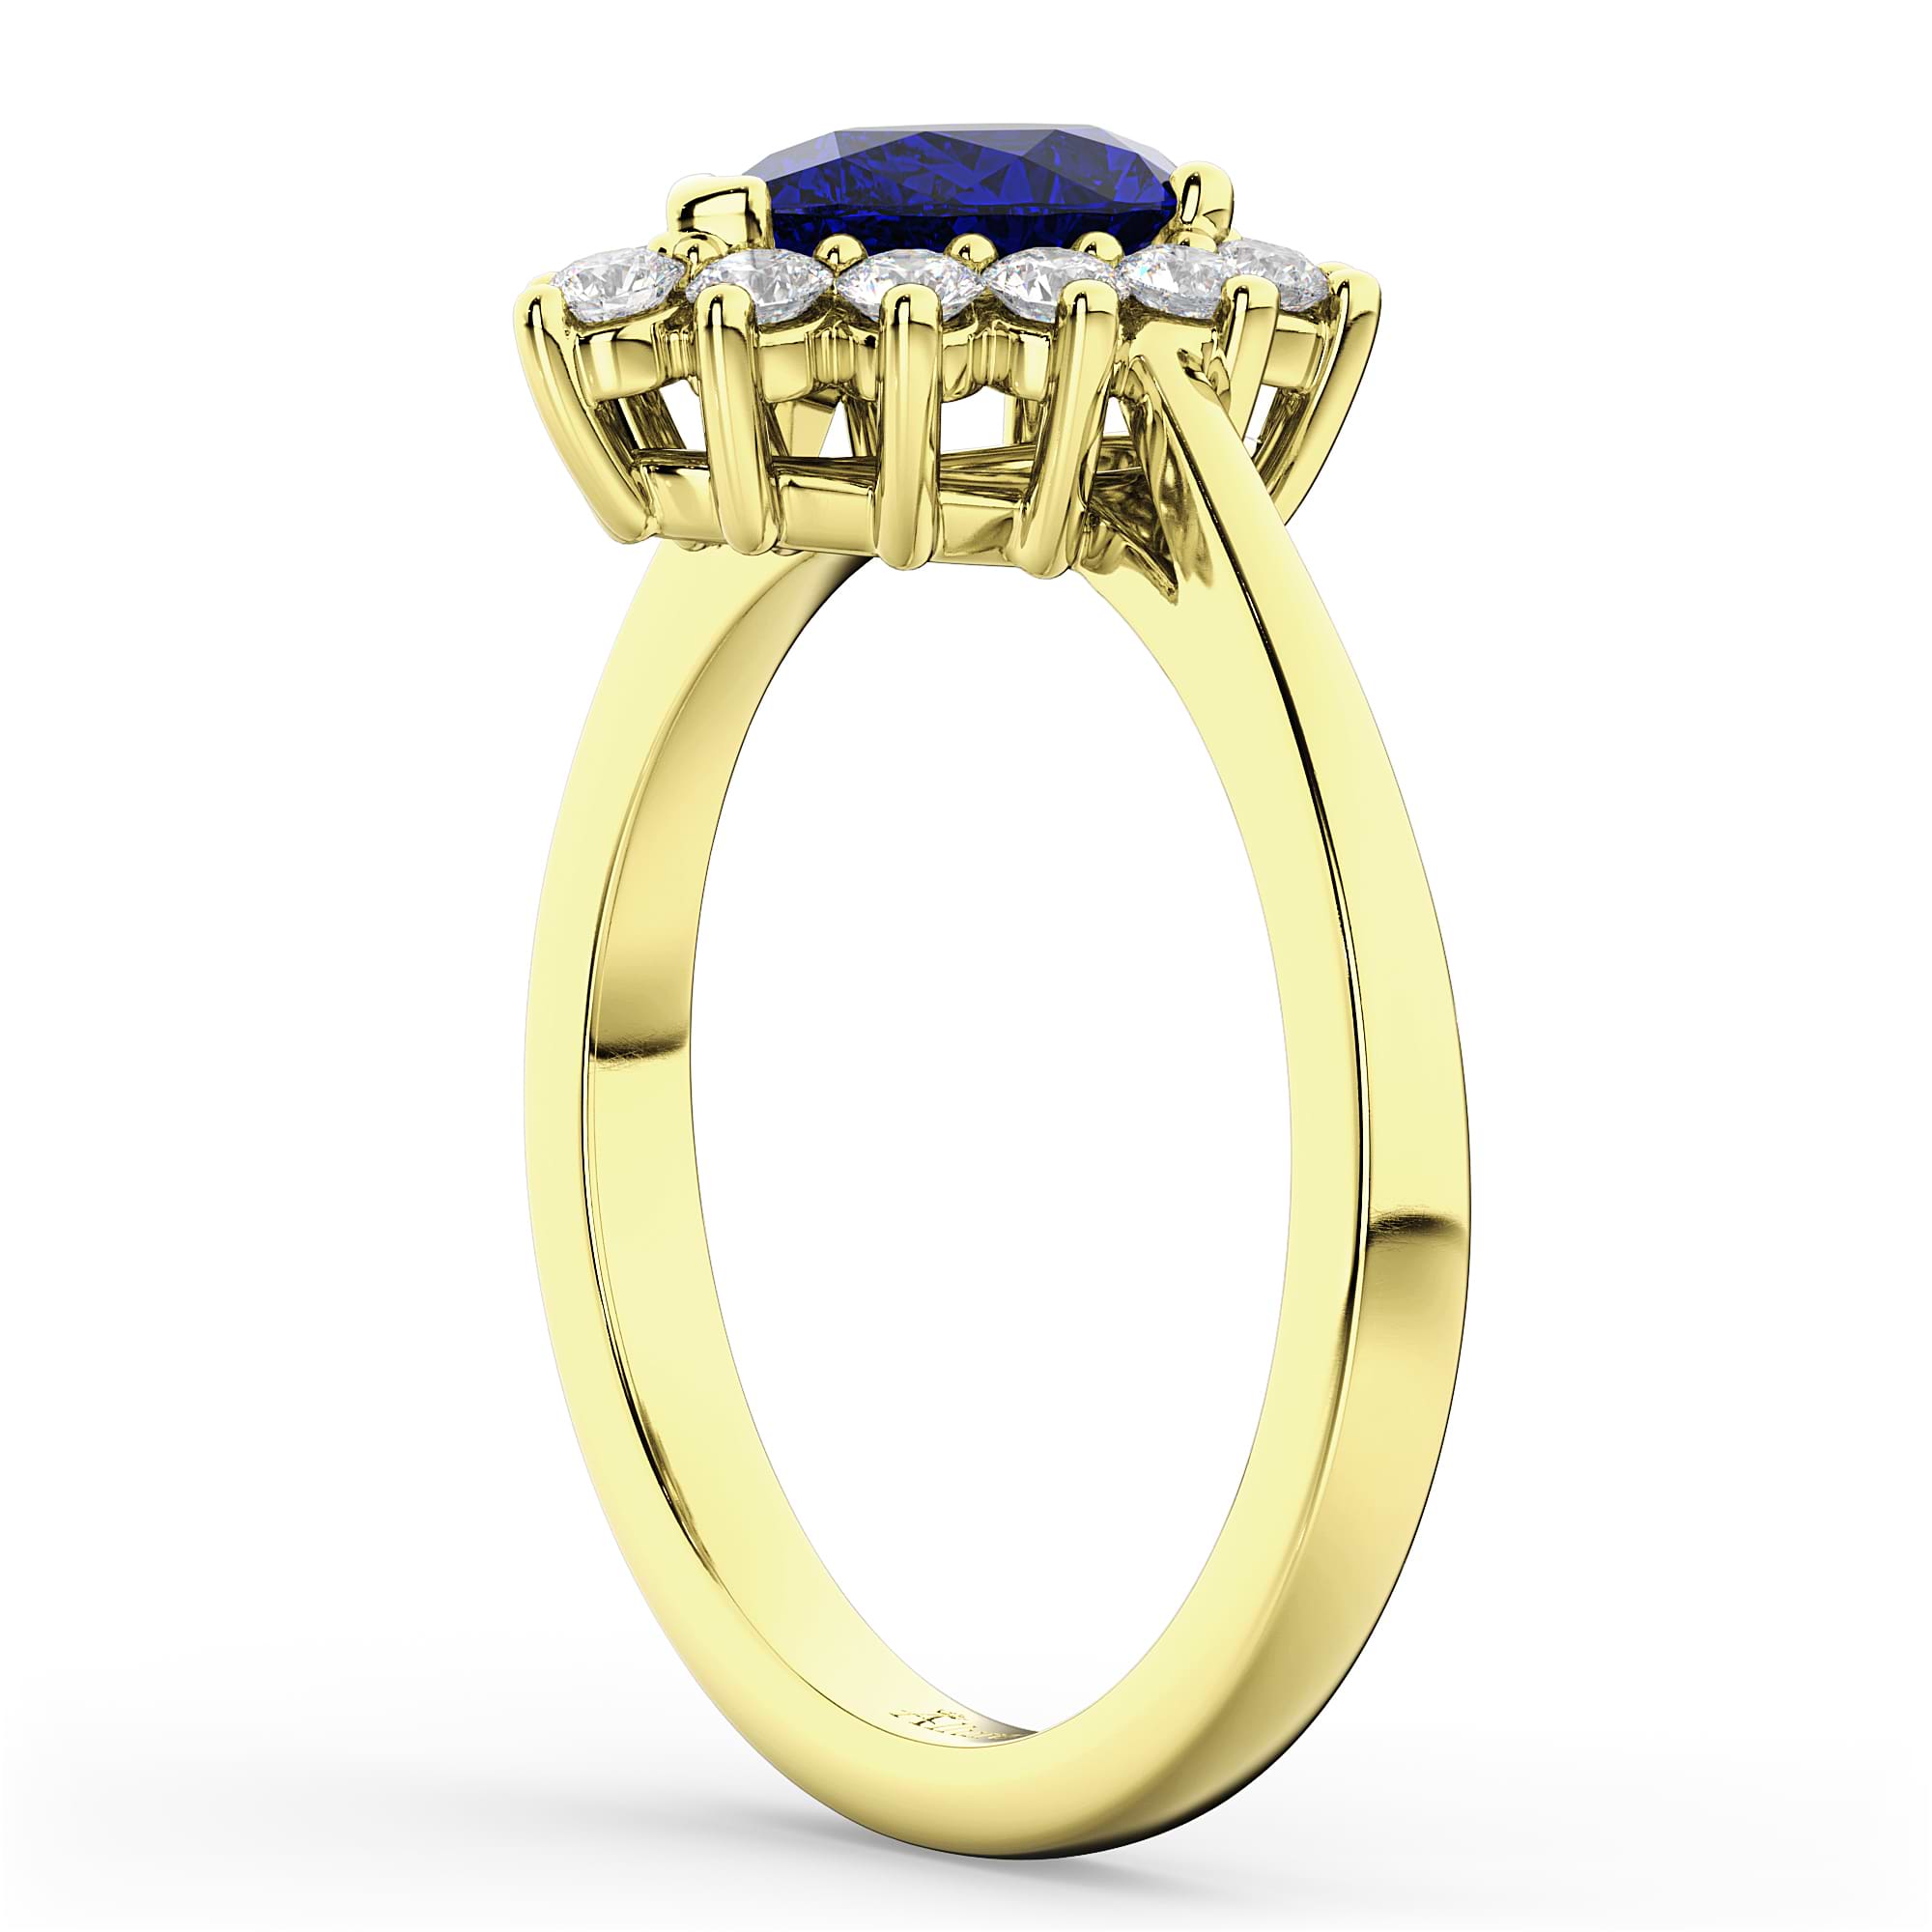 Halo Blue Sapphire & Diamond Floral Pear Shaped Fashion Ring 14k Yellow Gold (1.27ct)